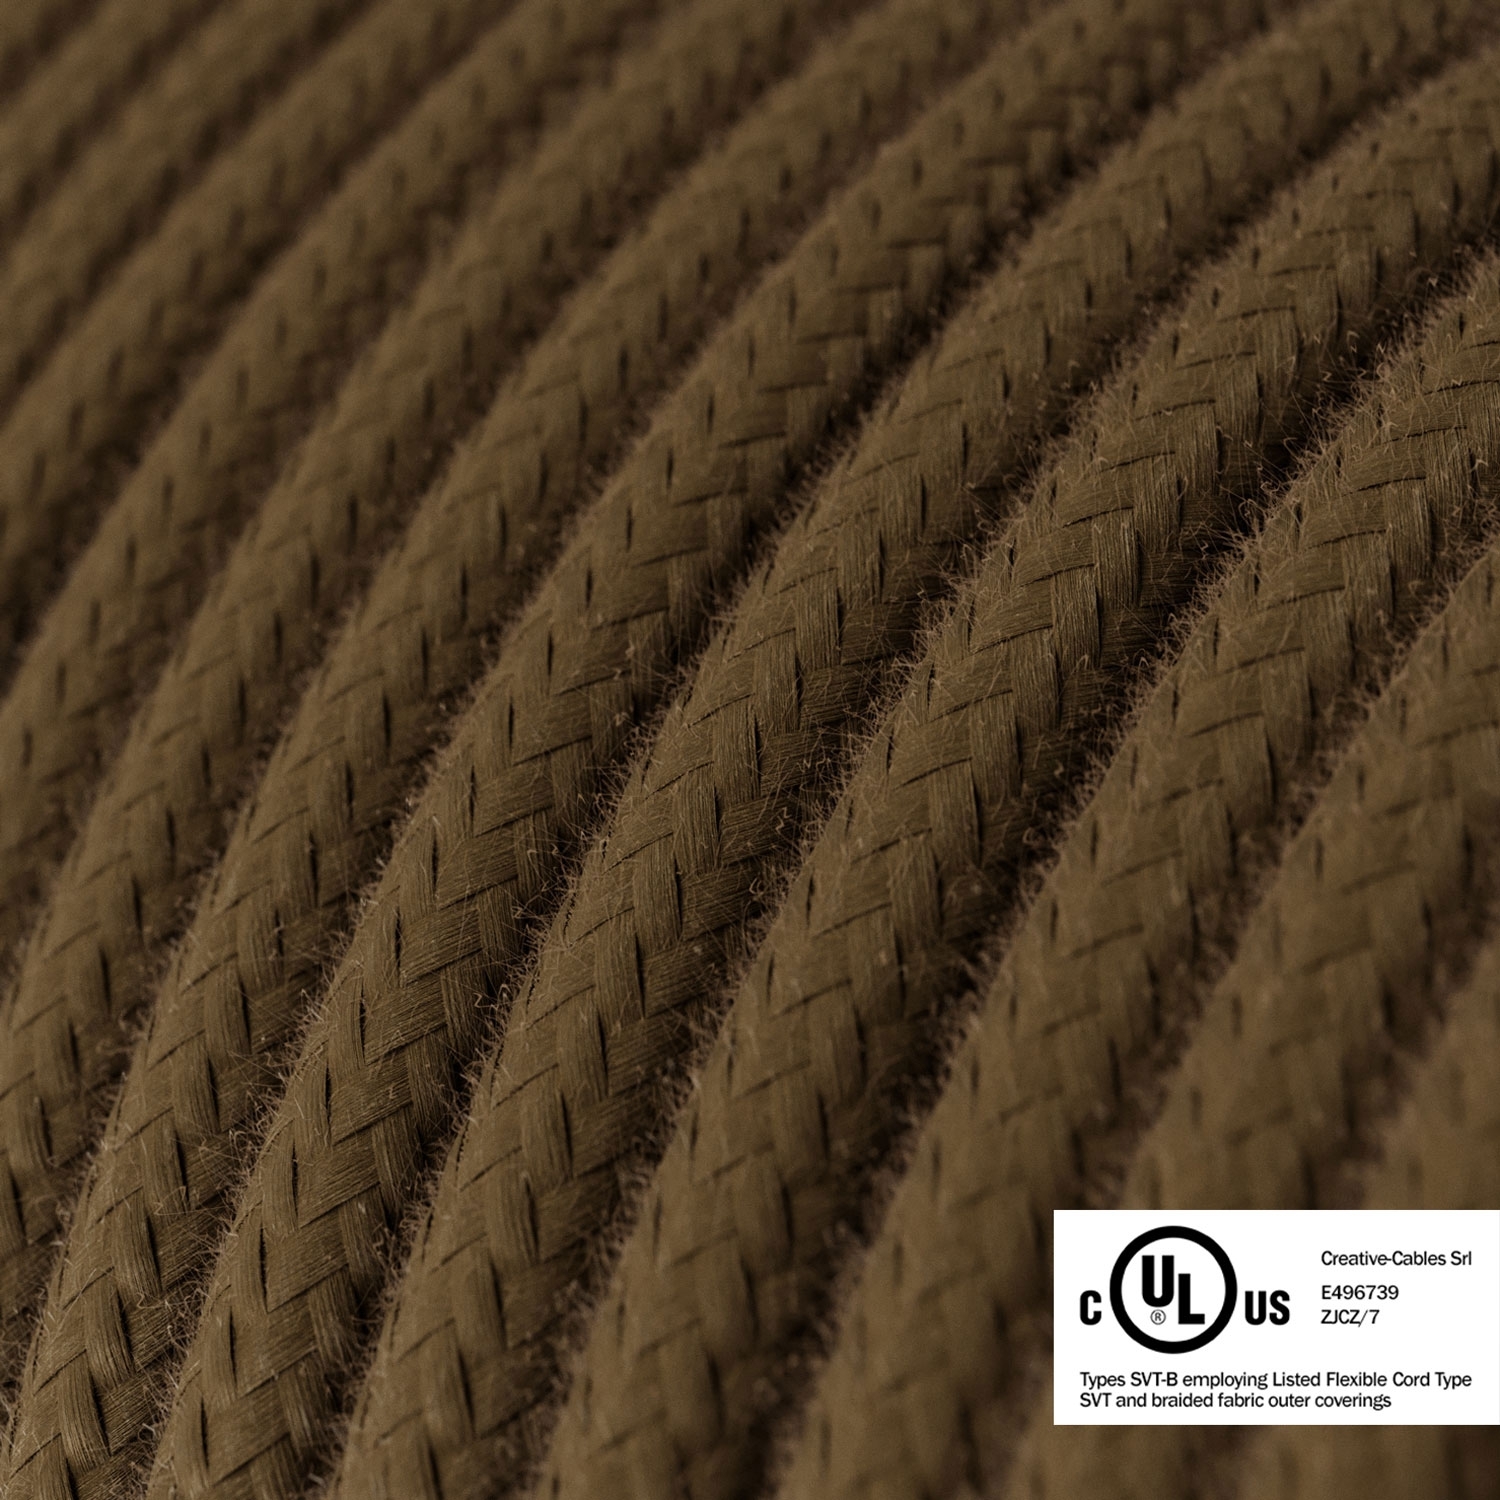 Brown Cotton covered Round electric cable - RC13